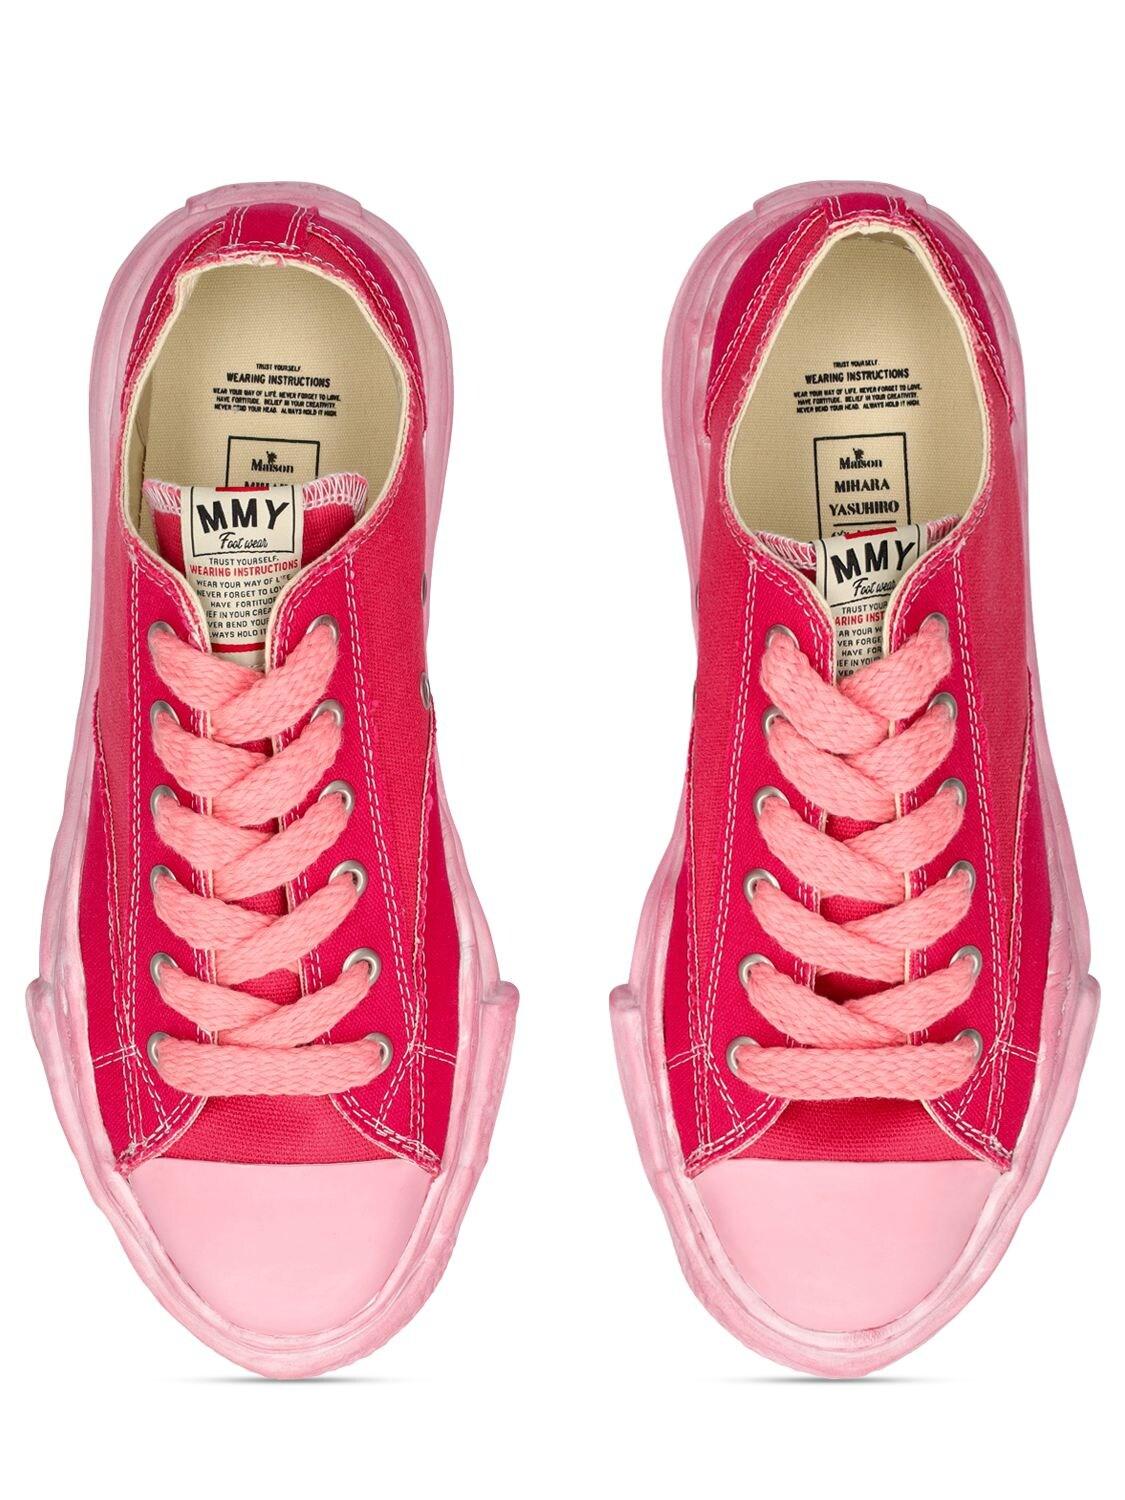 Mihara Yasuhiro Peterson Over Dyed Canvas Low Sneakers in Pink for